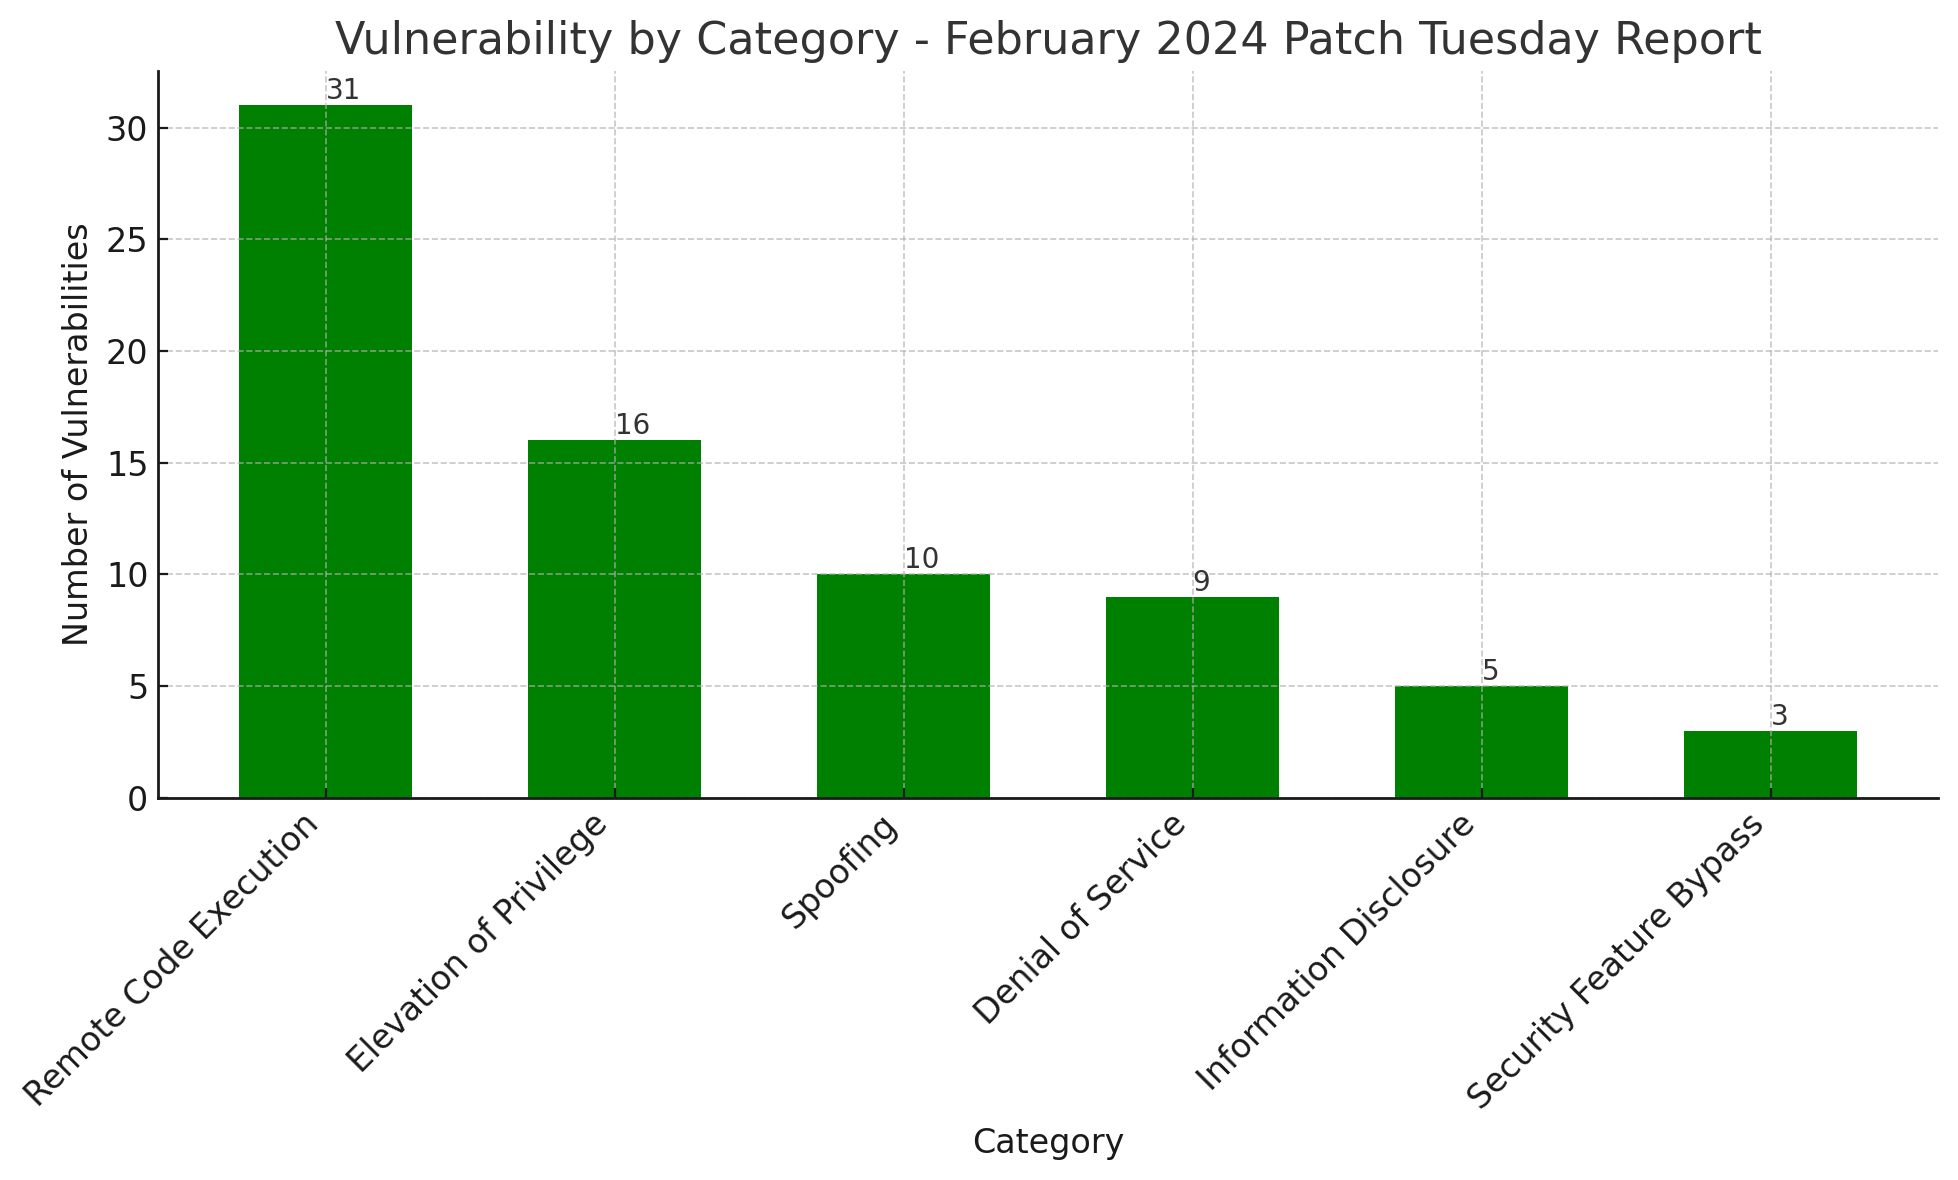 Bar chart showing the number of cybersecurity vulnerabilities categorized by type for February 2024, with 'Remote Code Execution' being the most common.